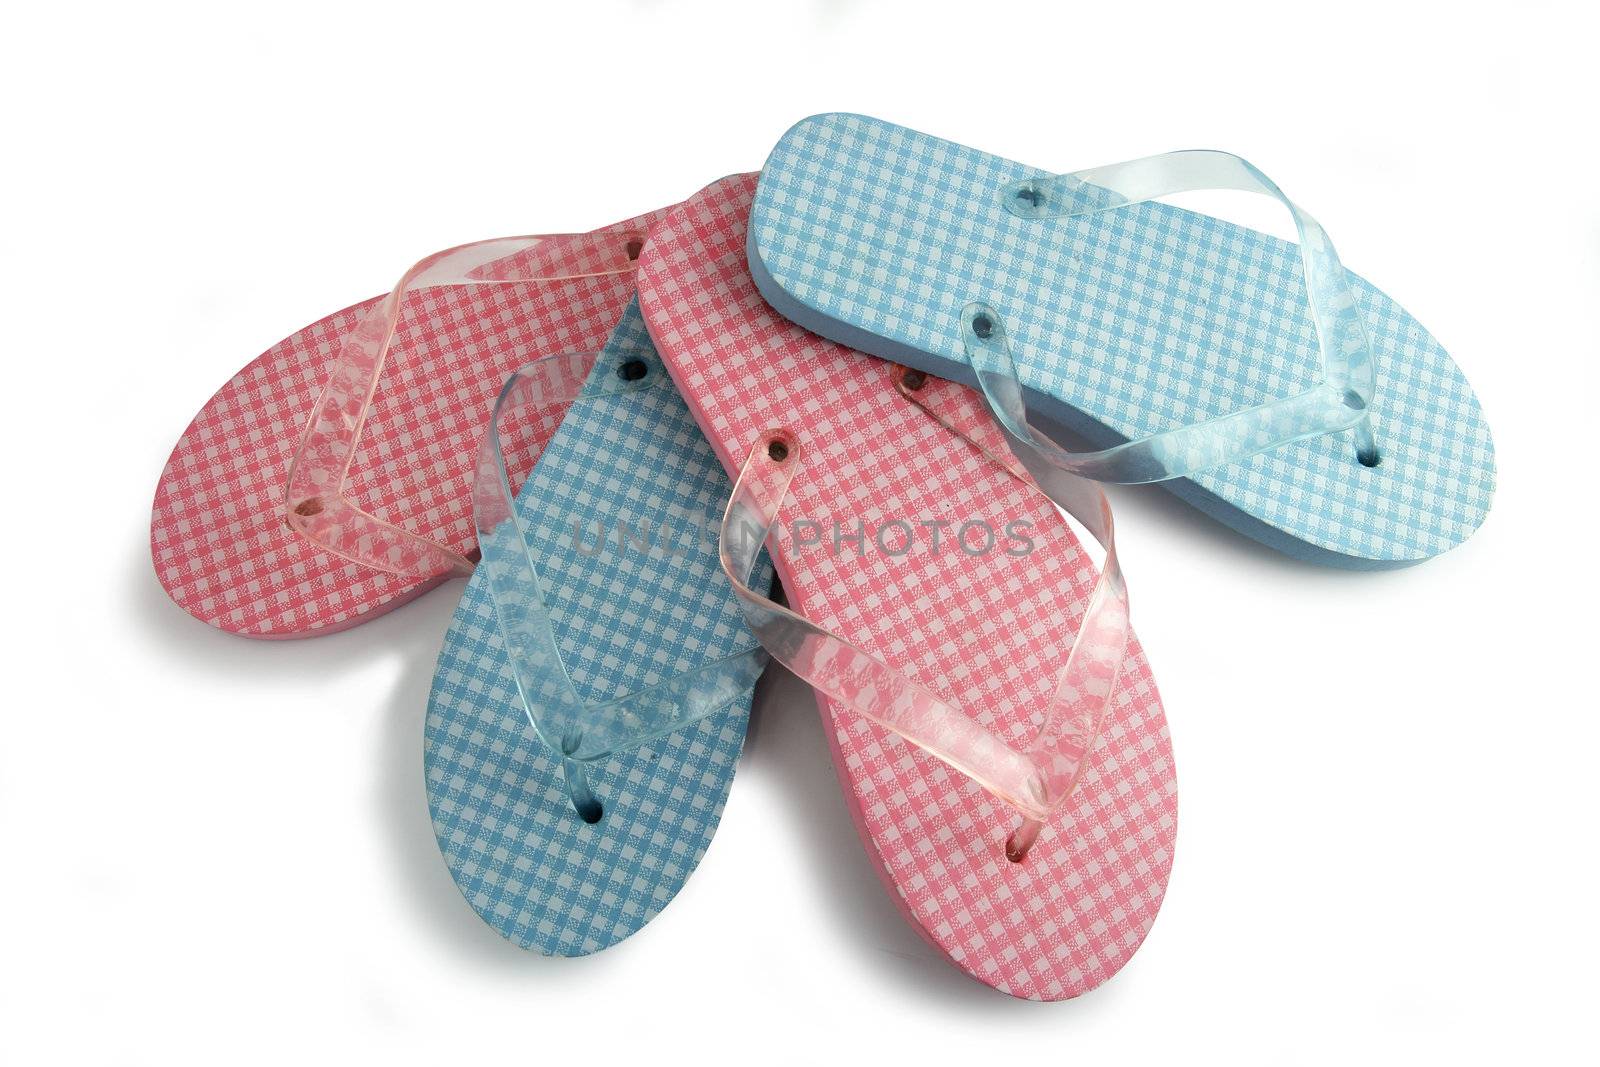 Two pairs of flip-flops by phovoir